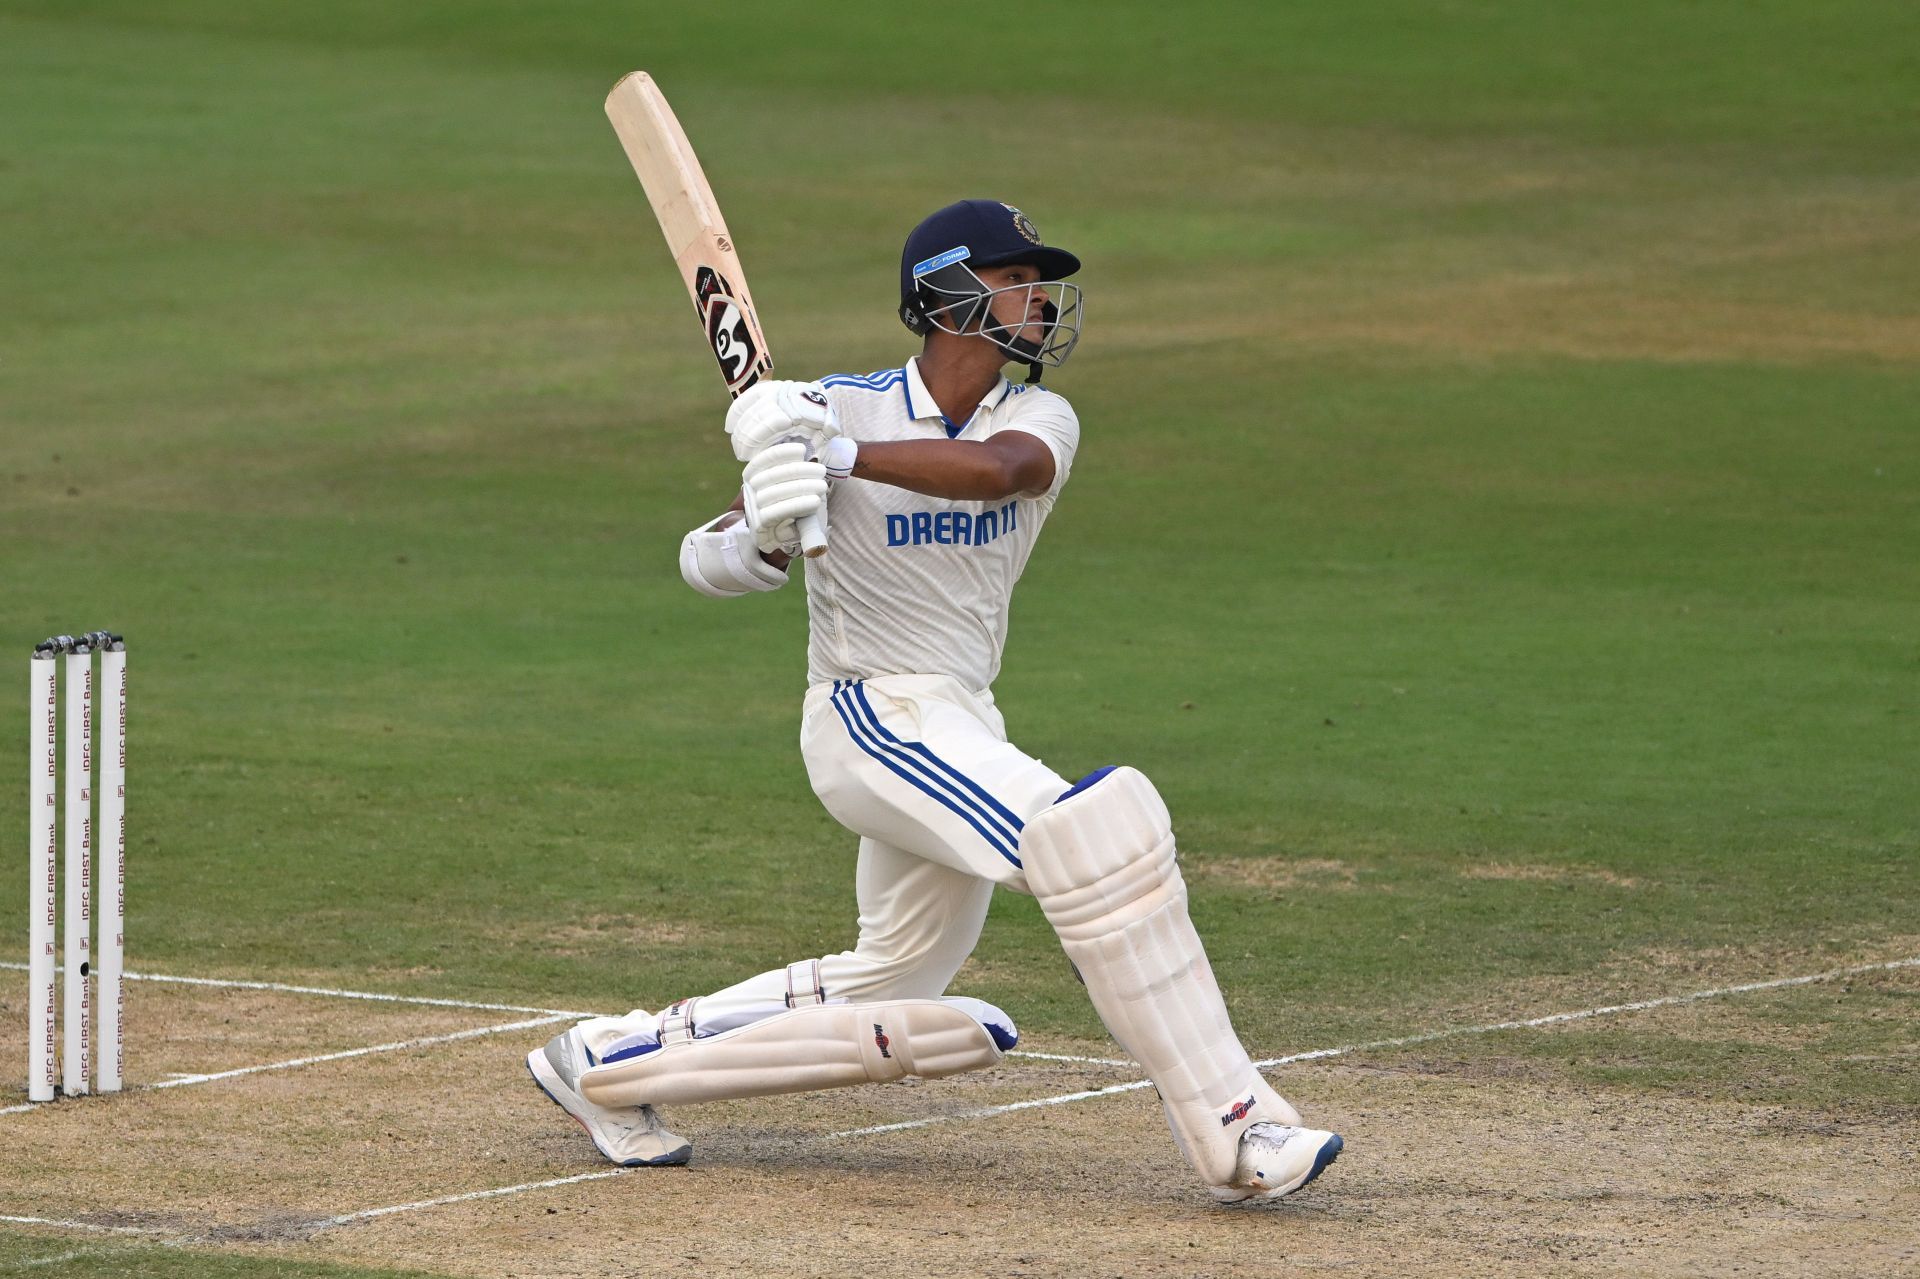 Yashasvi Jaiswal struck 19 fours and seven sixes during his 209-run knock. [P/C: Getty]